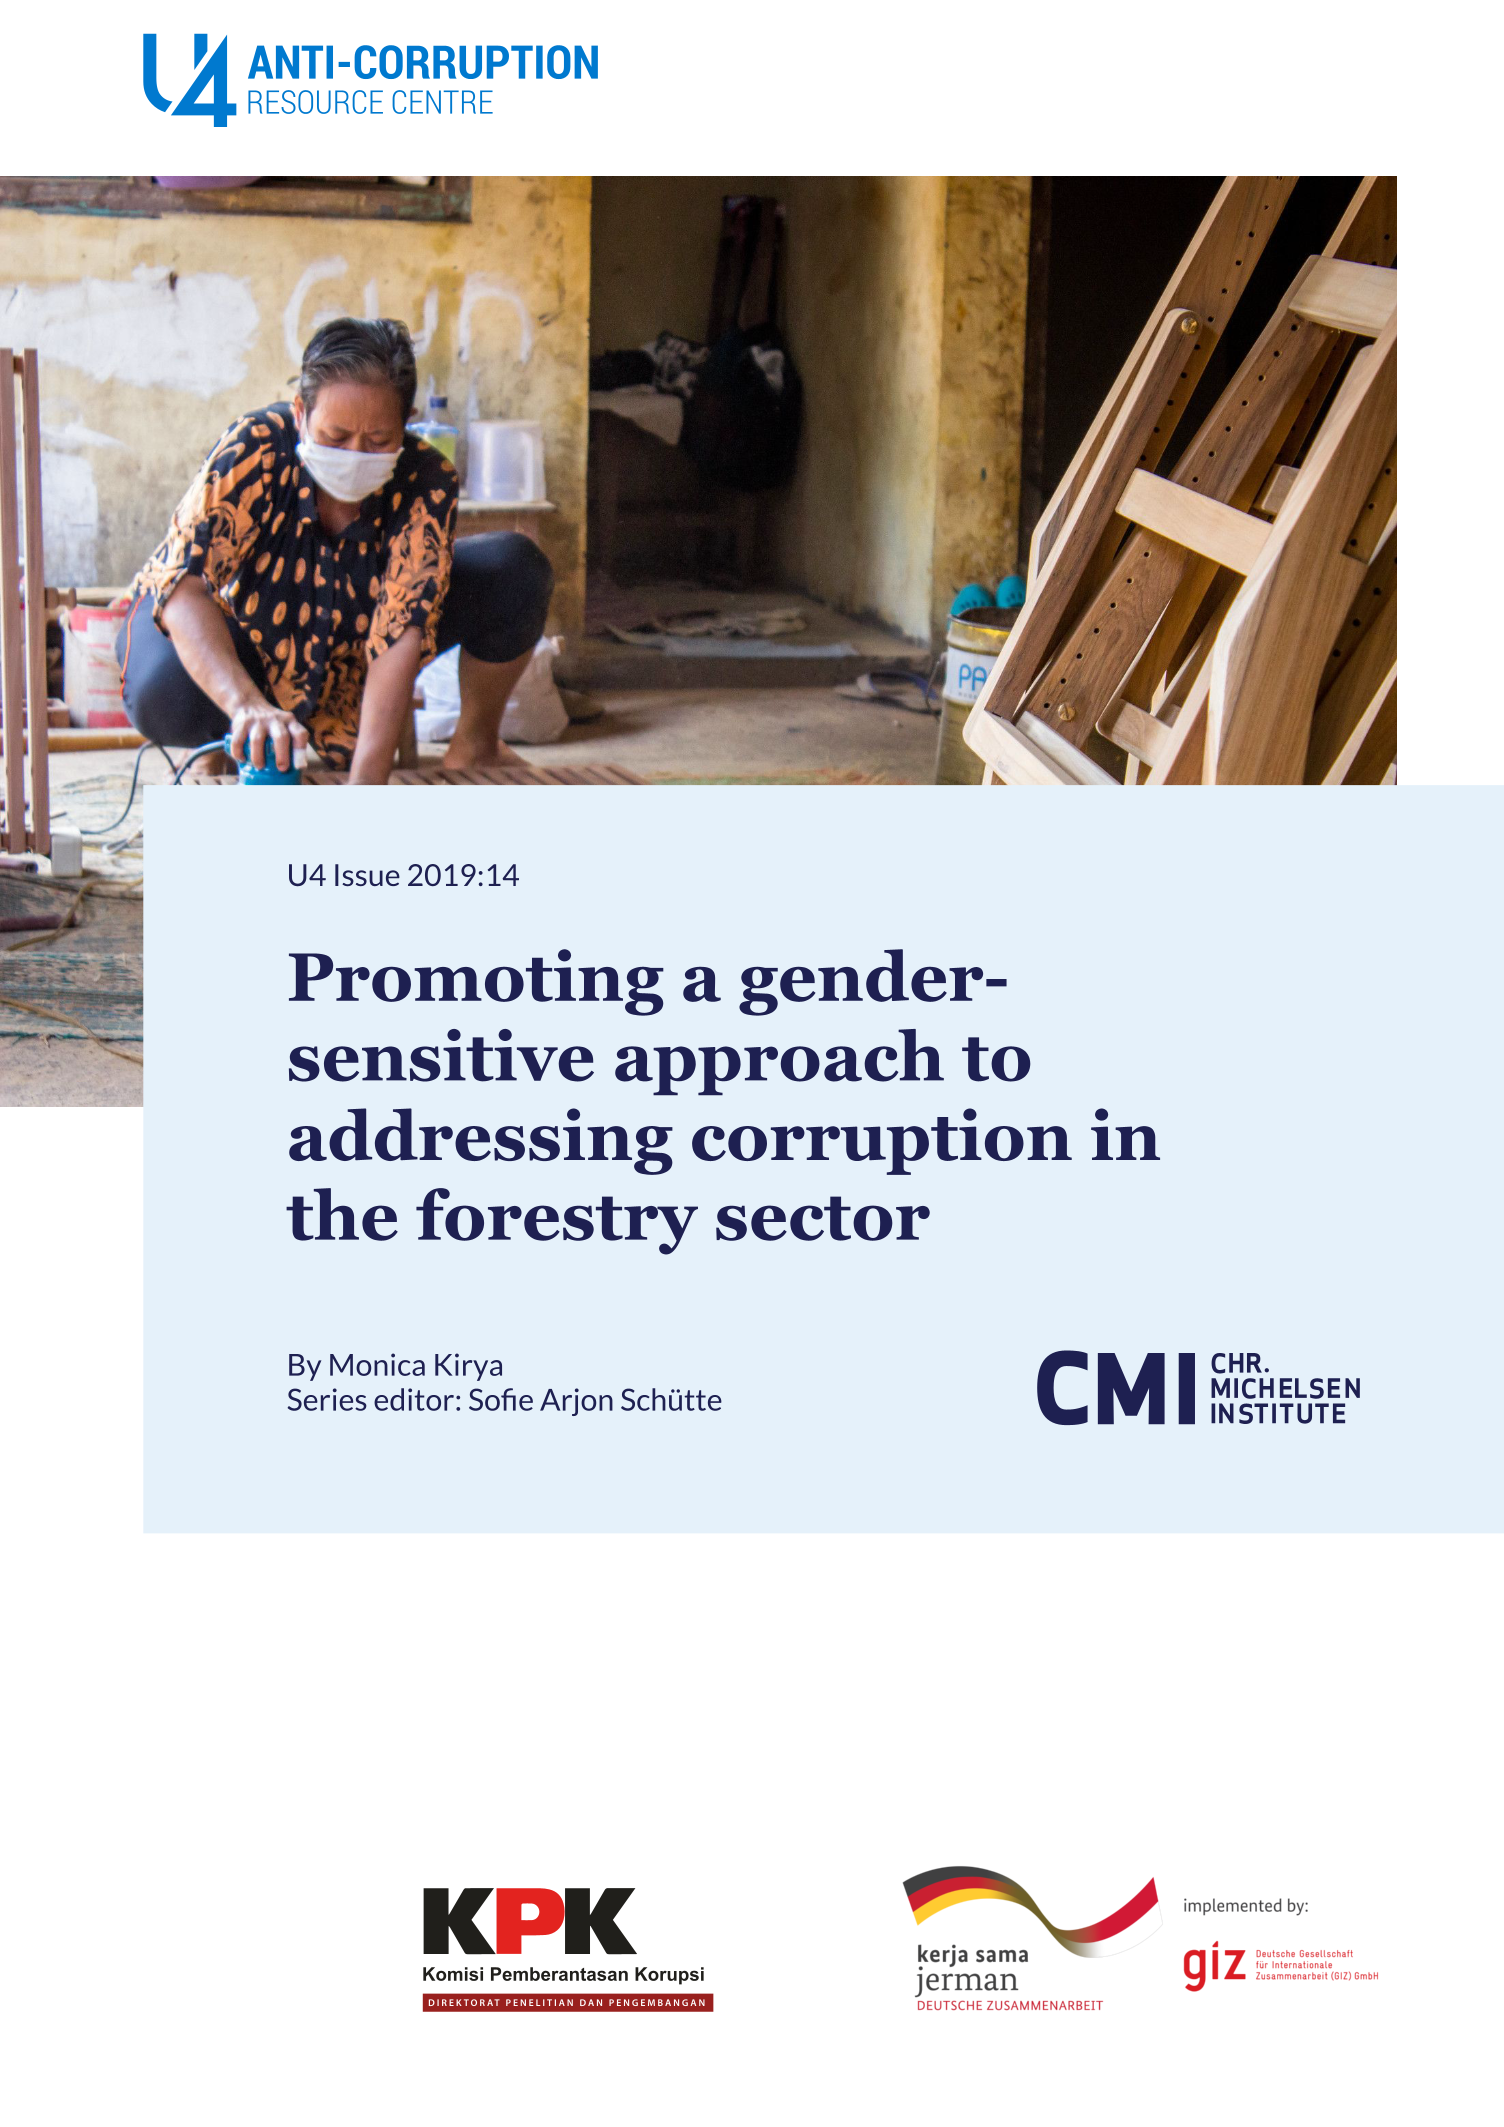 Promoting a gender-sensitive approach to addressing corruption in the forestry sector